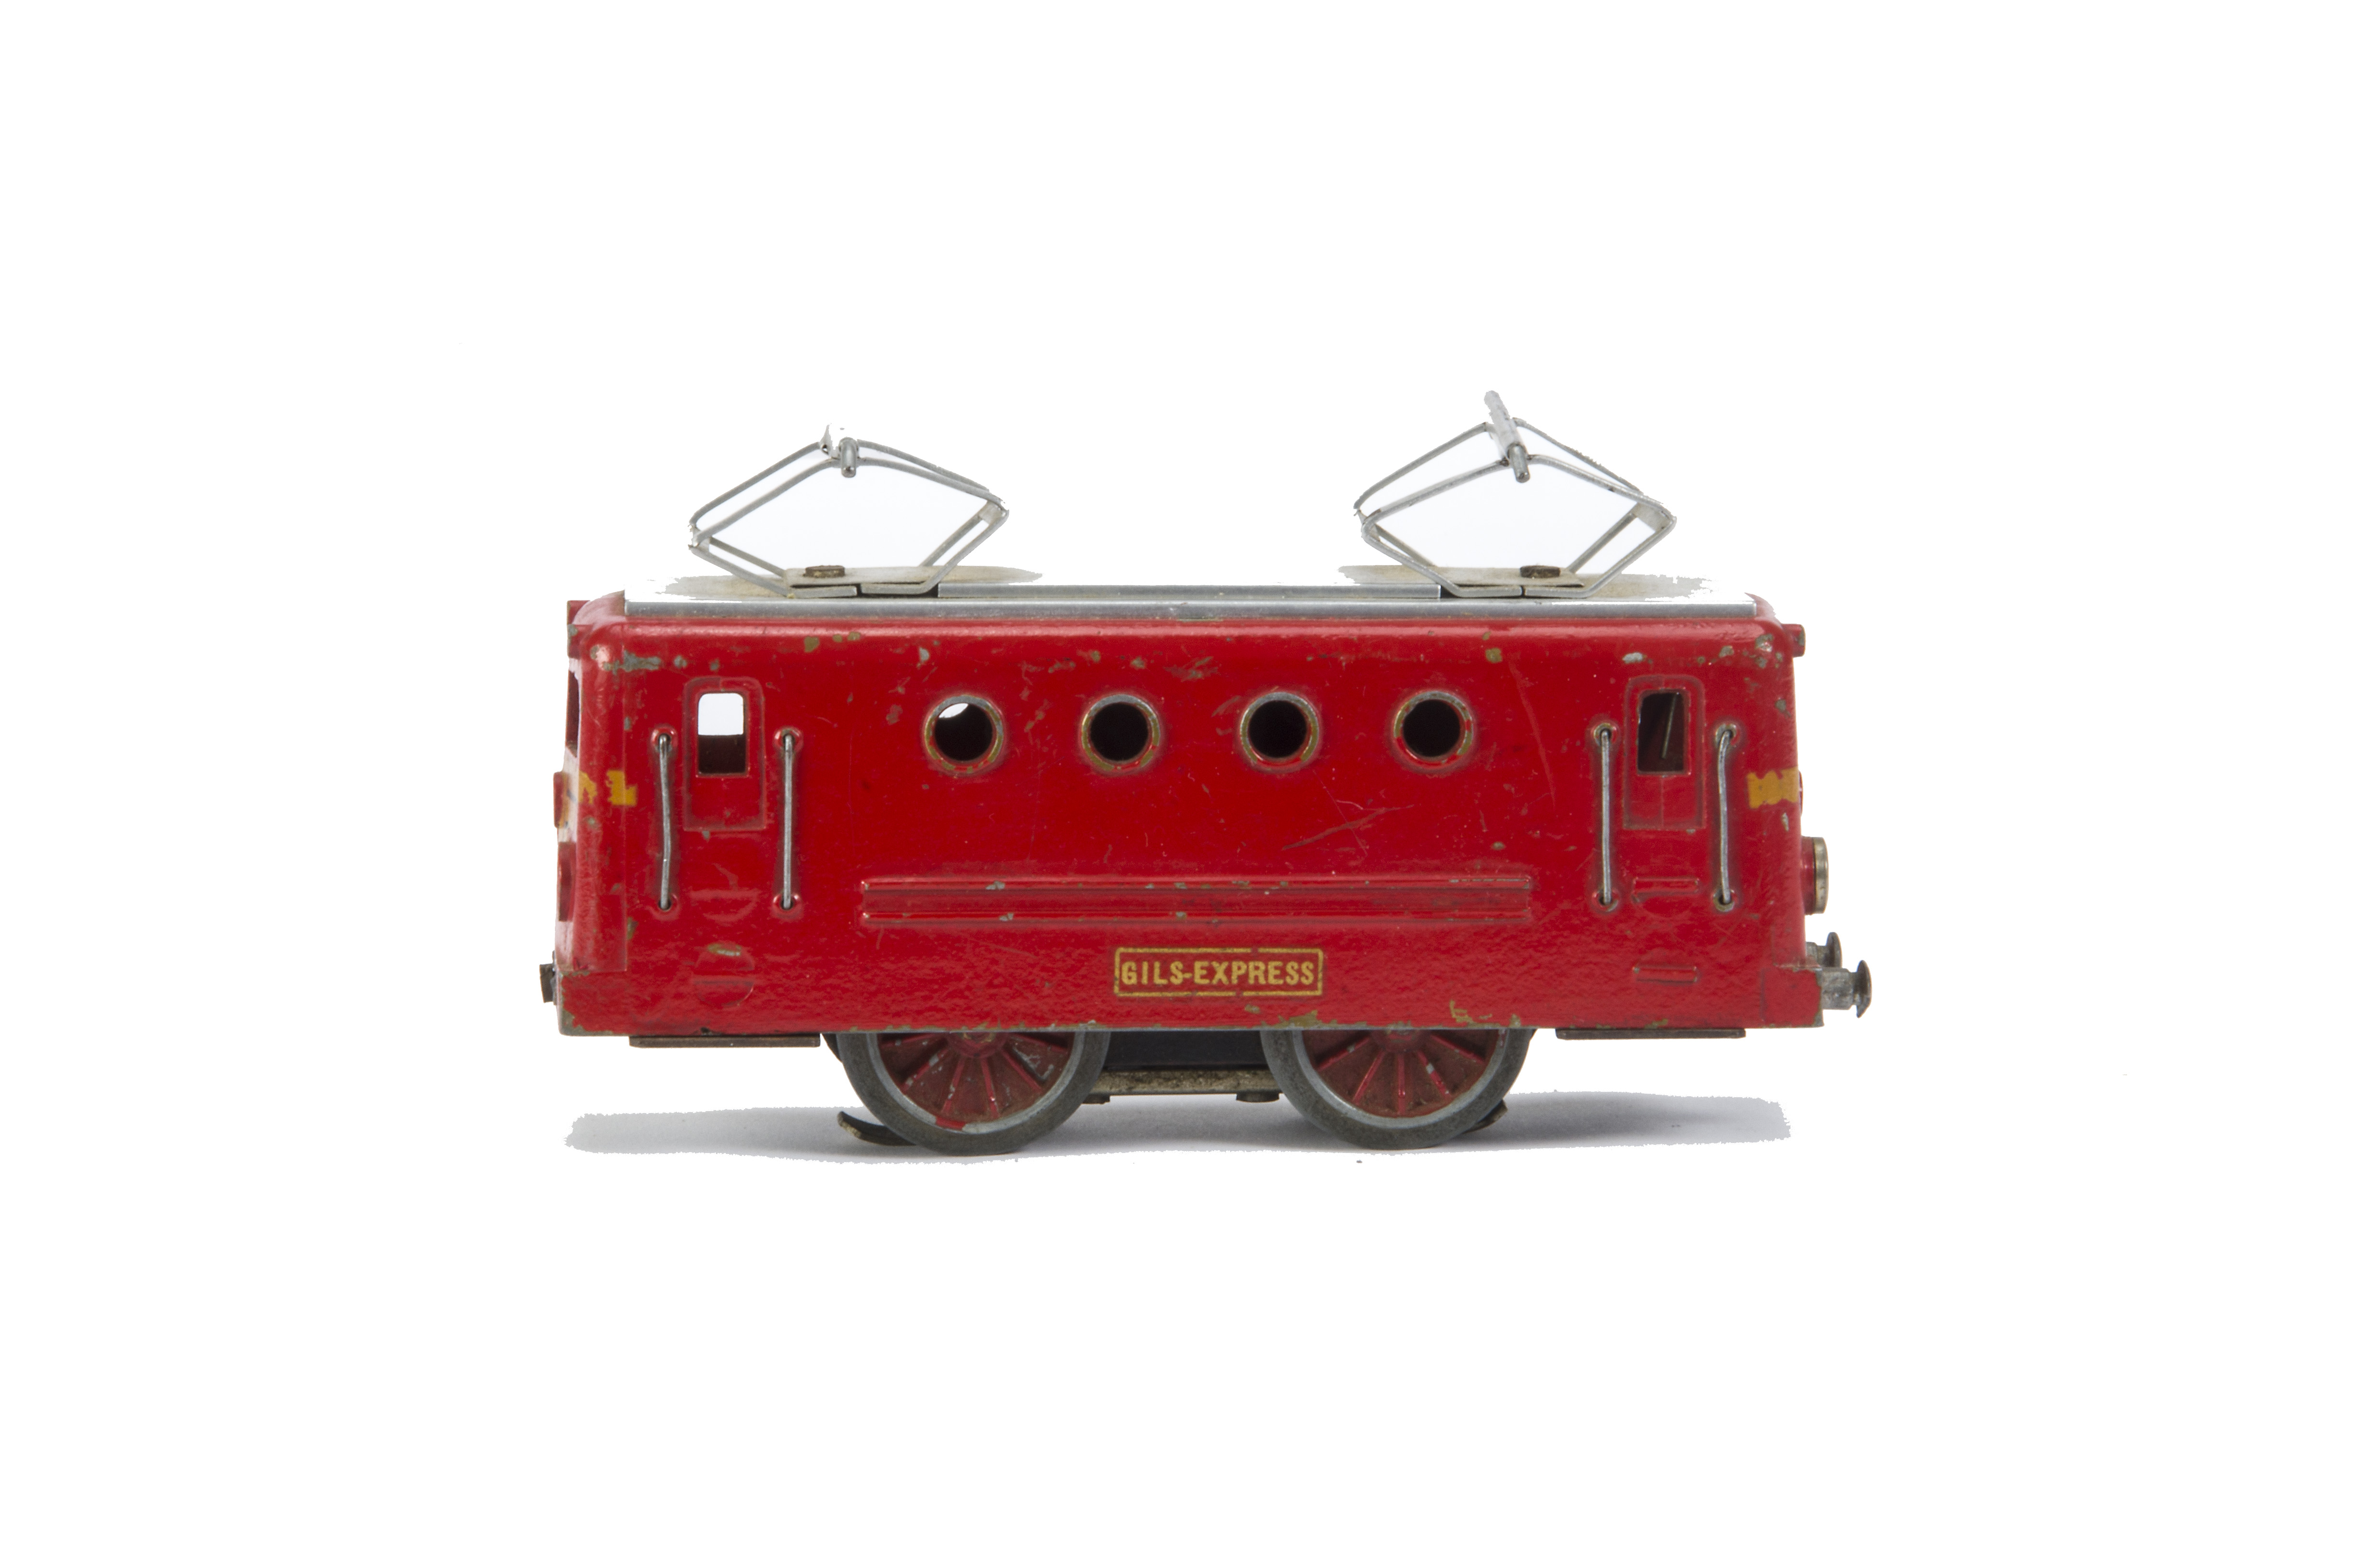 An Uncommon Express Gils (Belgium) O Gauge 3-rail Electric Locomotive, an 0-4-0 finished in red with